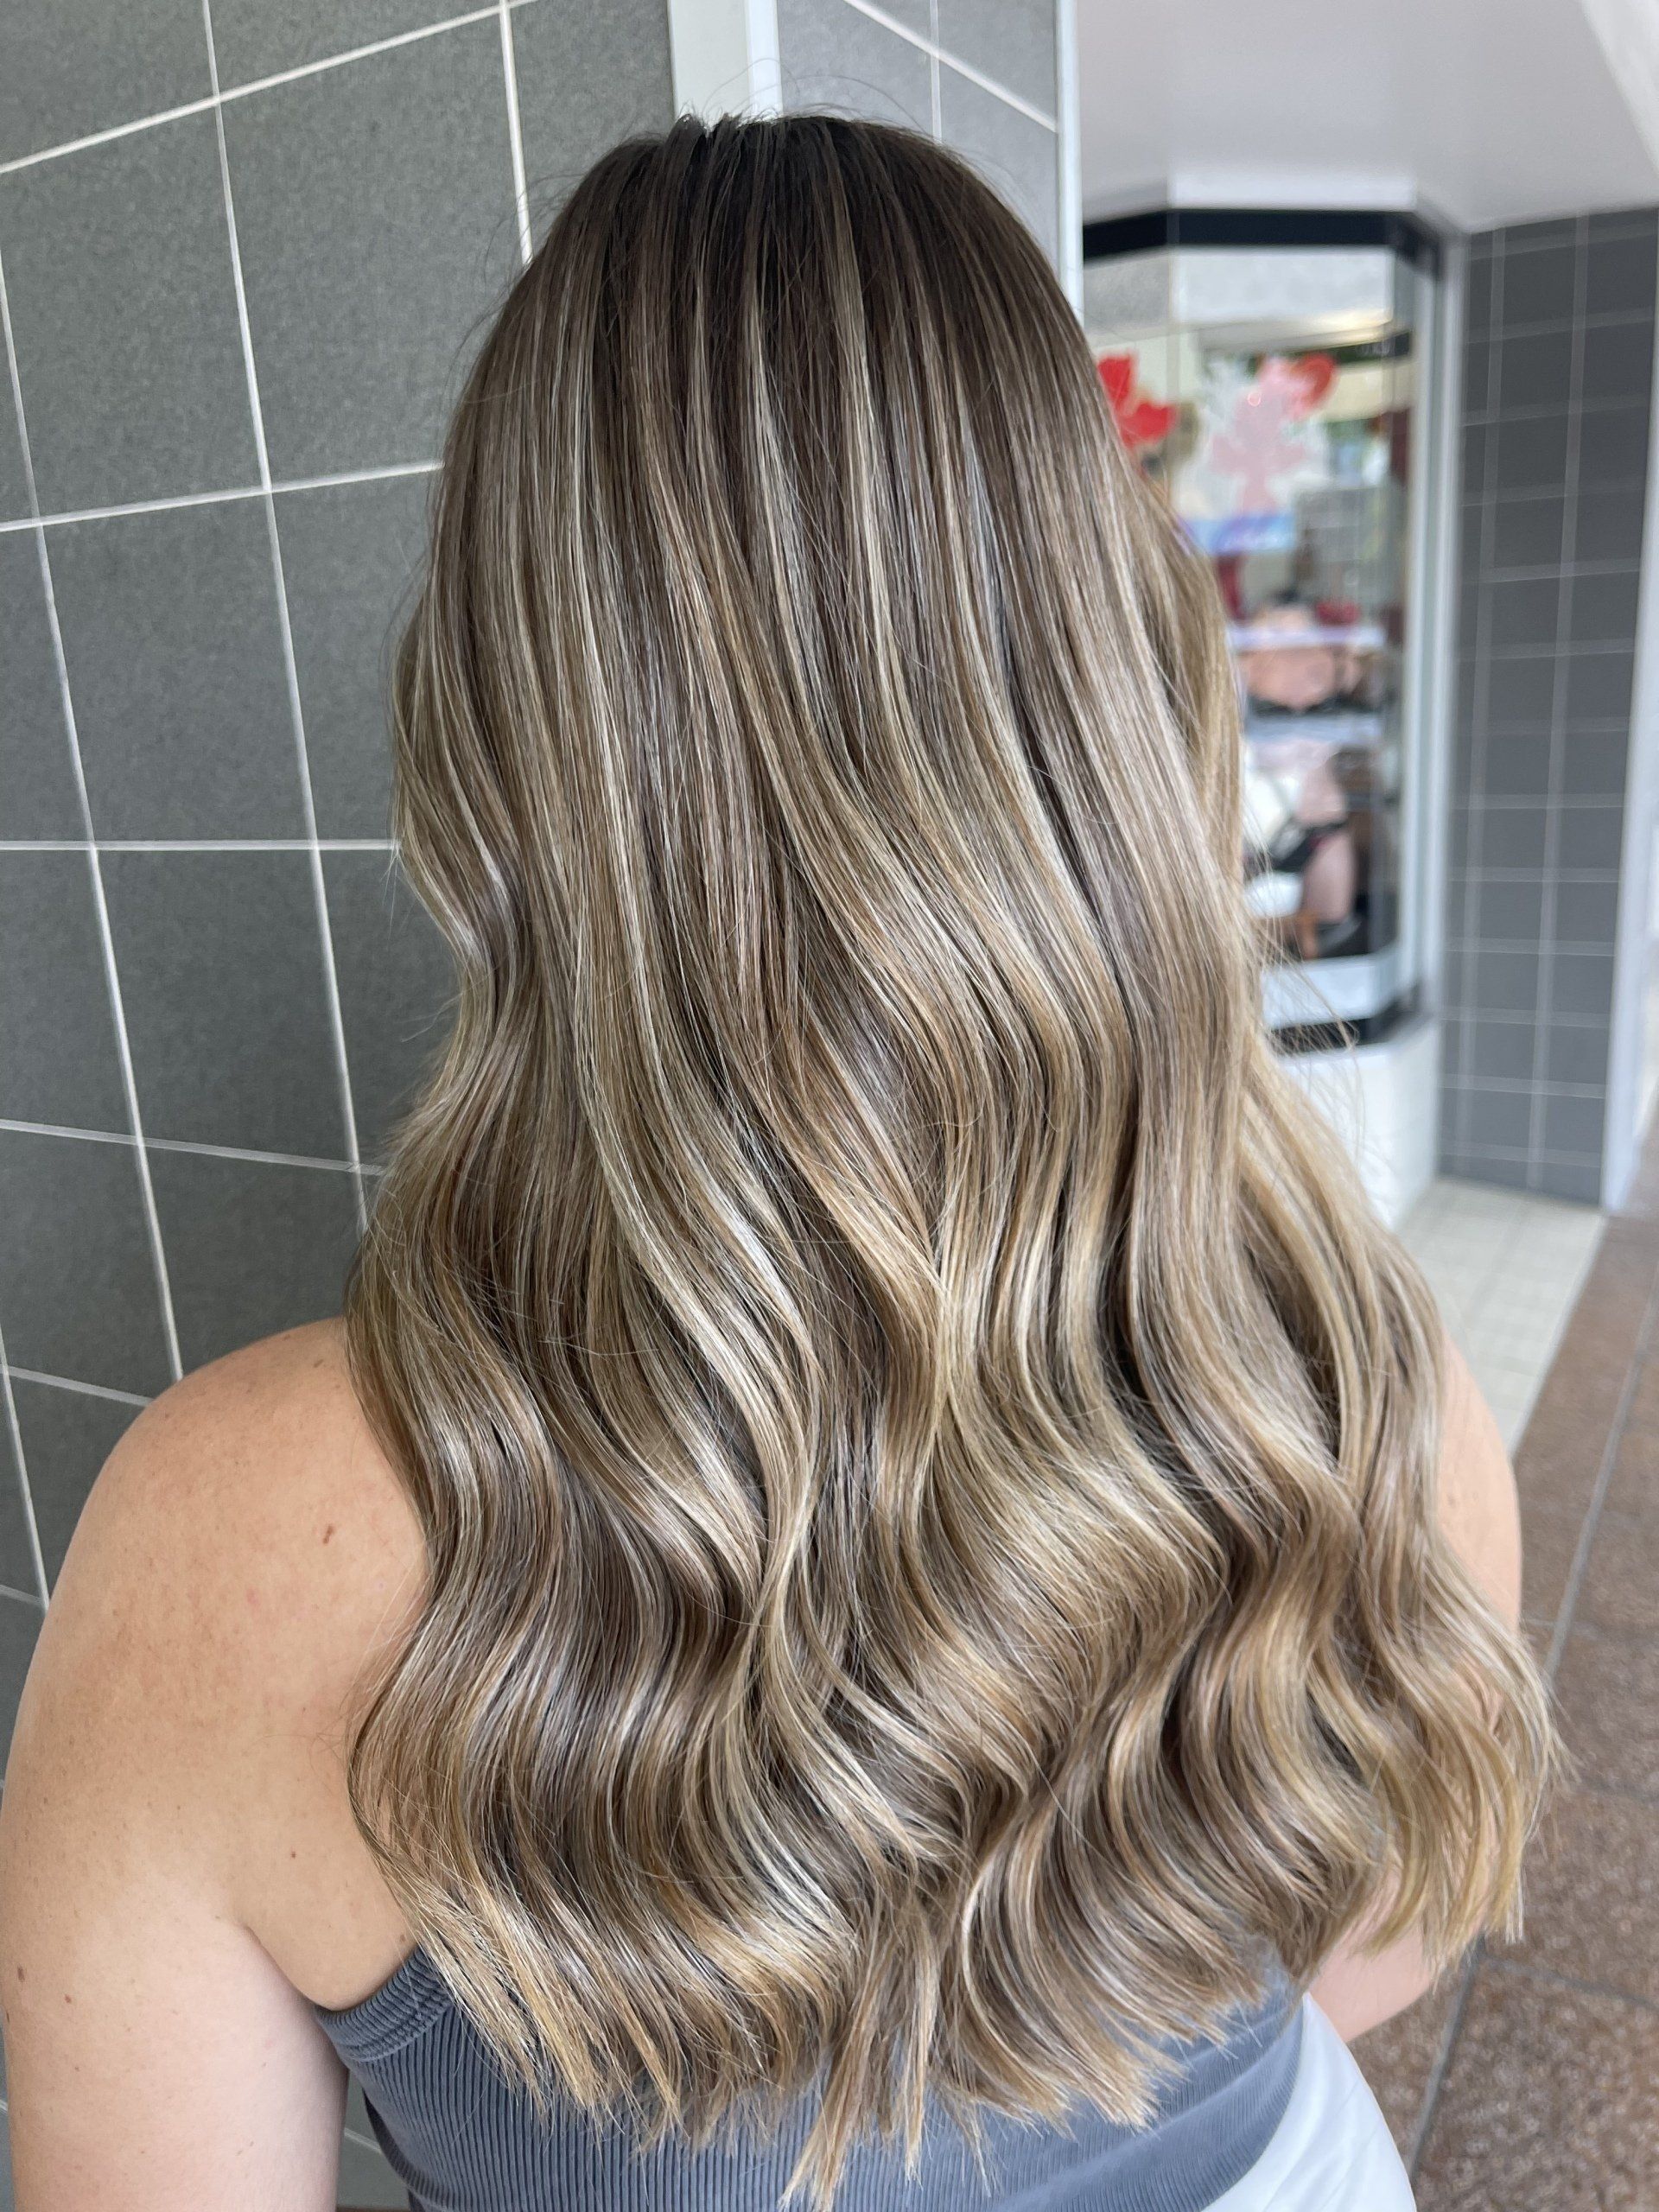 Woman With Curly Hair — L.A Hair Design Ballina in Ballina, NSW